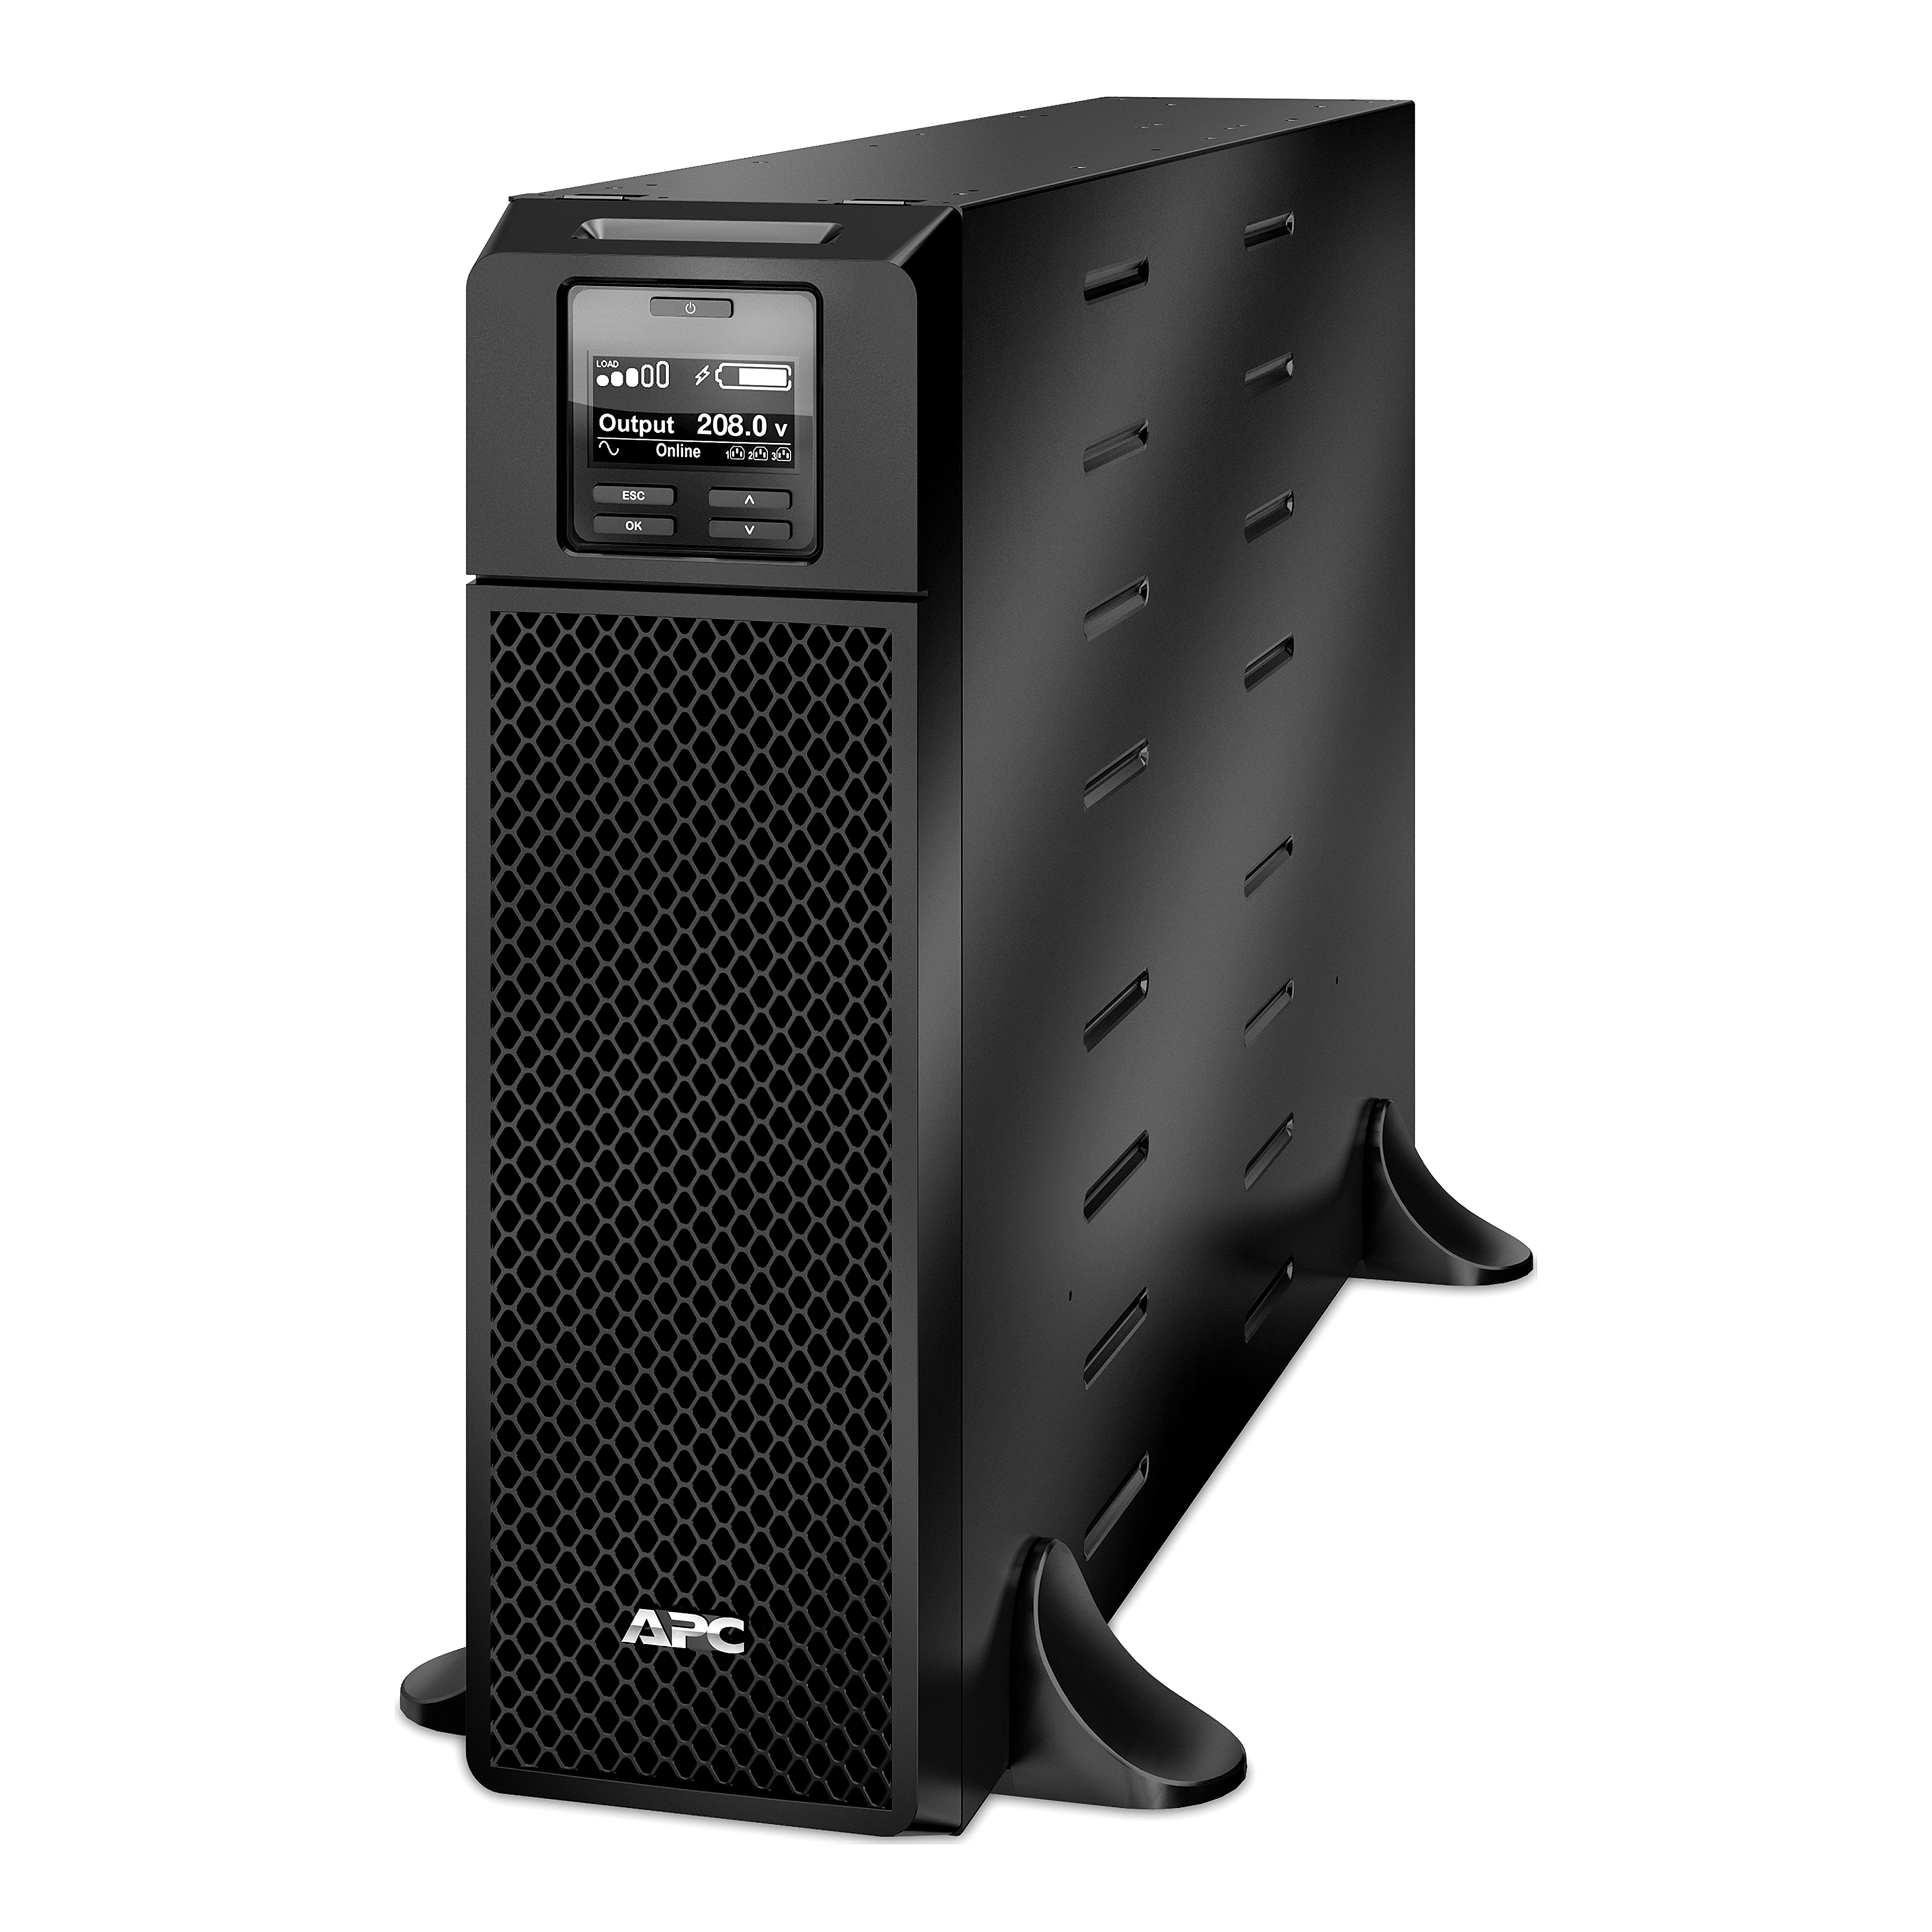 APC Smart-UPS On-Line, 5.4kVA, Tower, 208V, 2x L6-20R+2x L6-30R NEMA outlets, Network Card+SmartSlot, Extended runtime, W/O rail kit